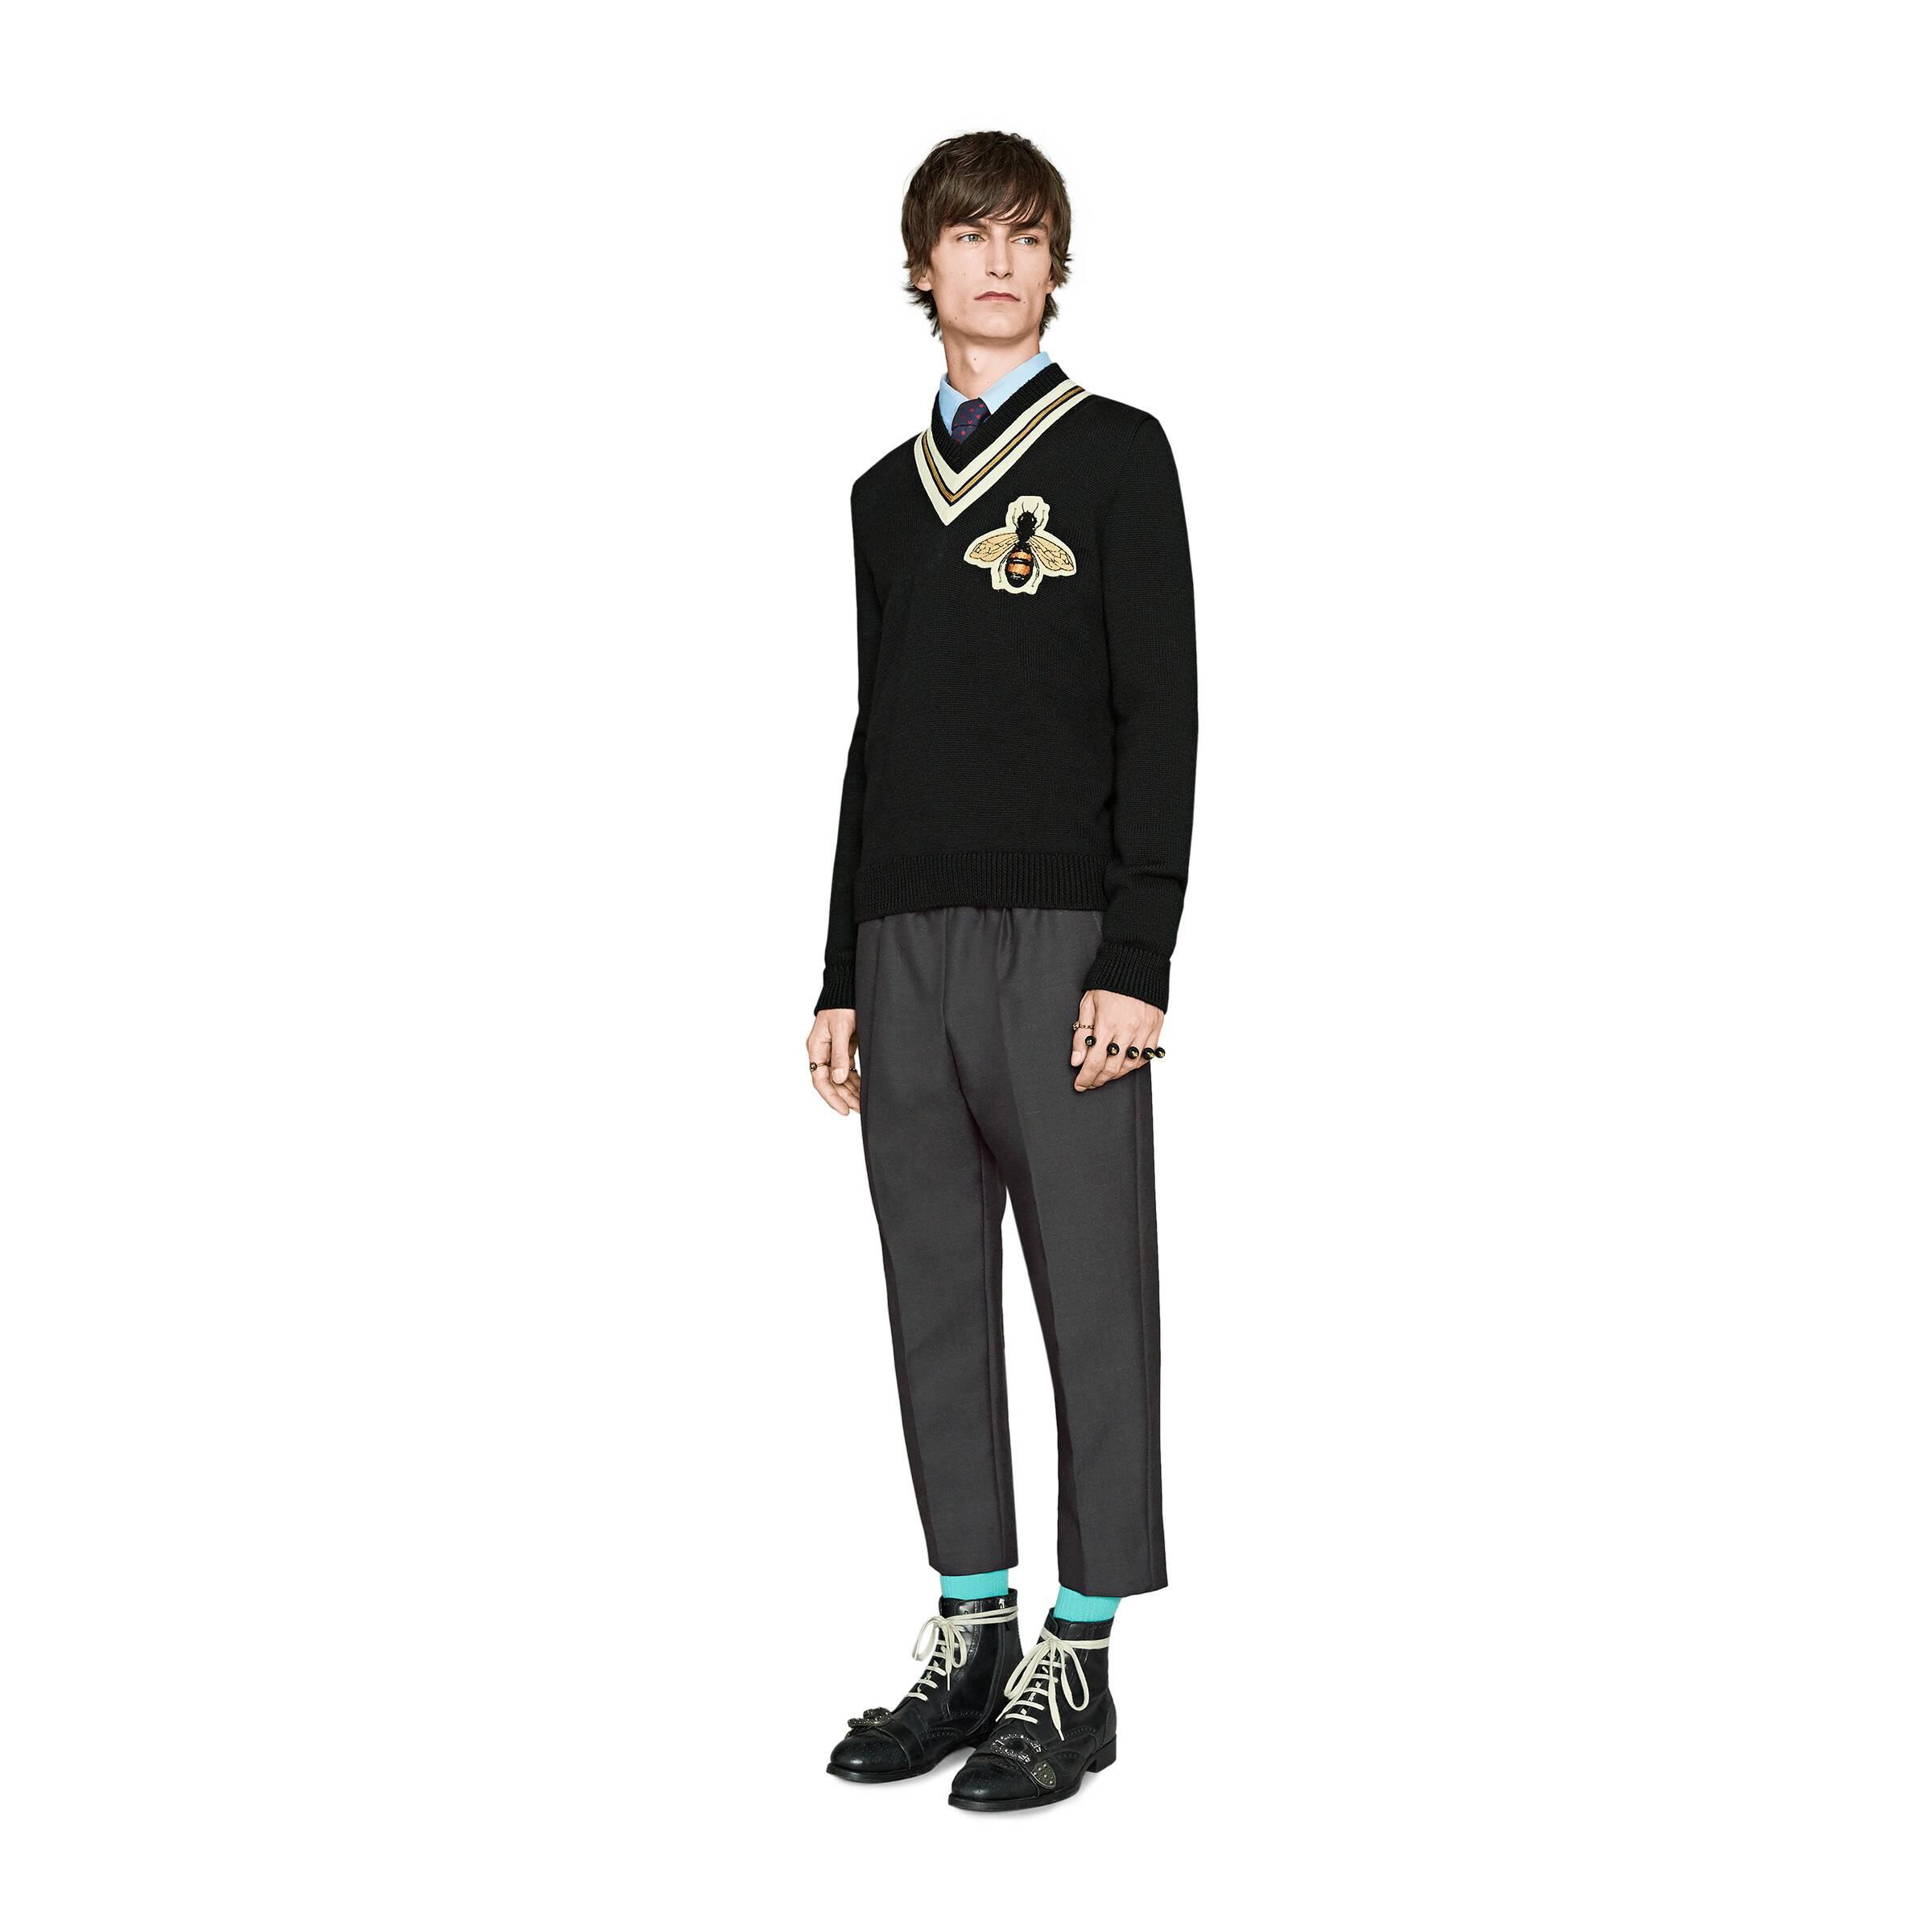 omgive firkant biologi Gucci Wool Sweater With Bee Appliqué in Black for Men - Lyst